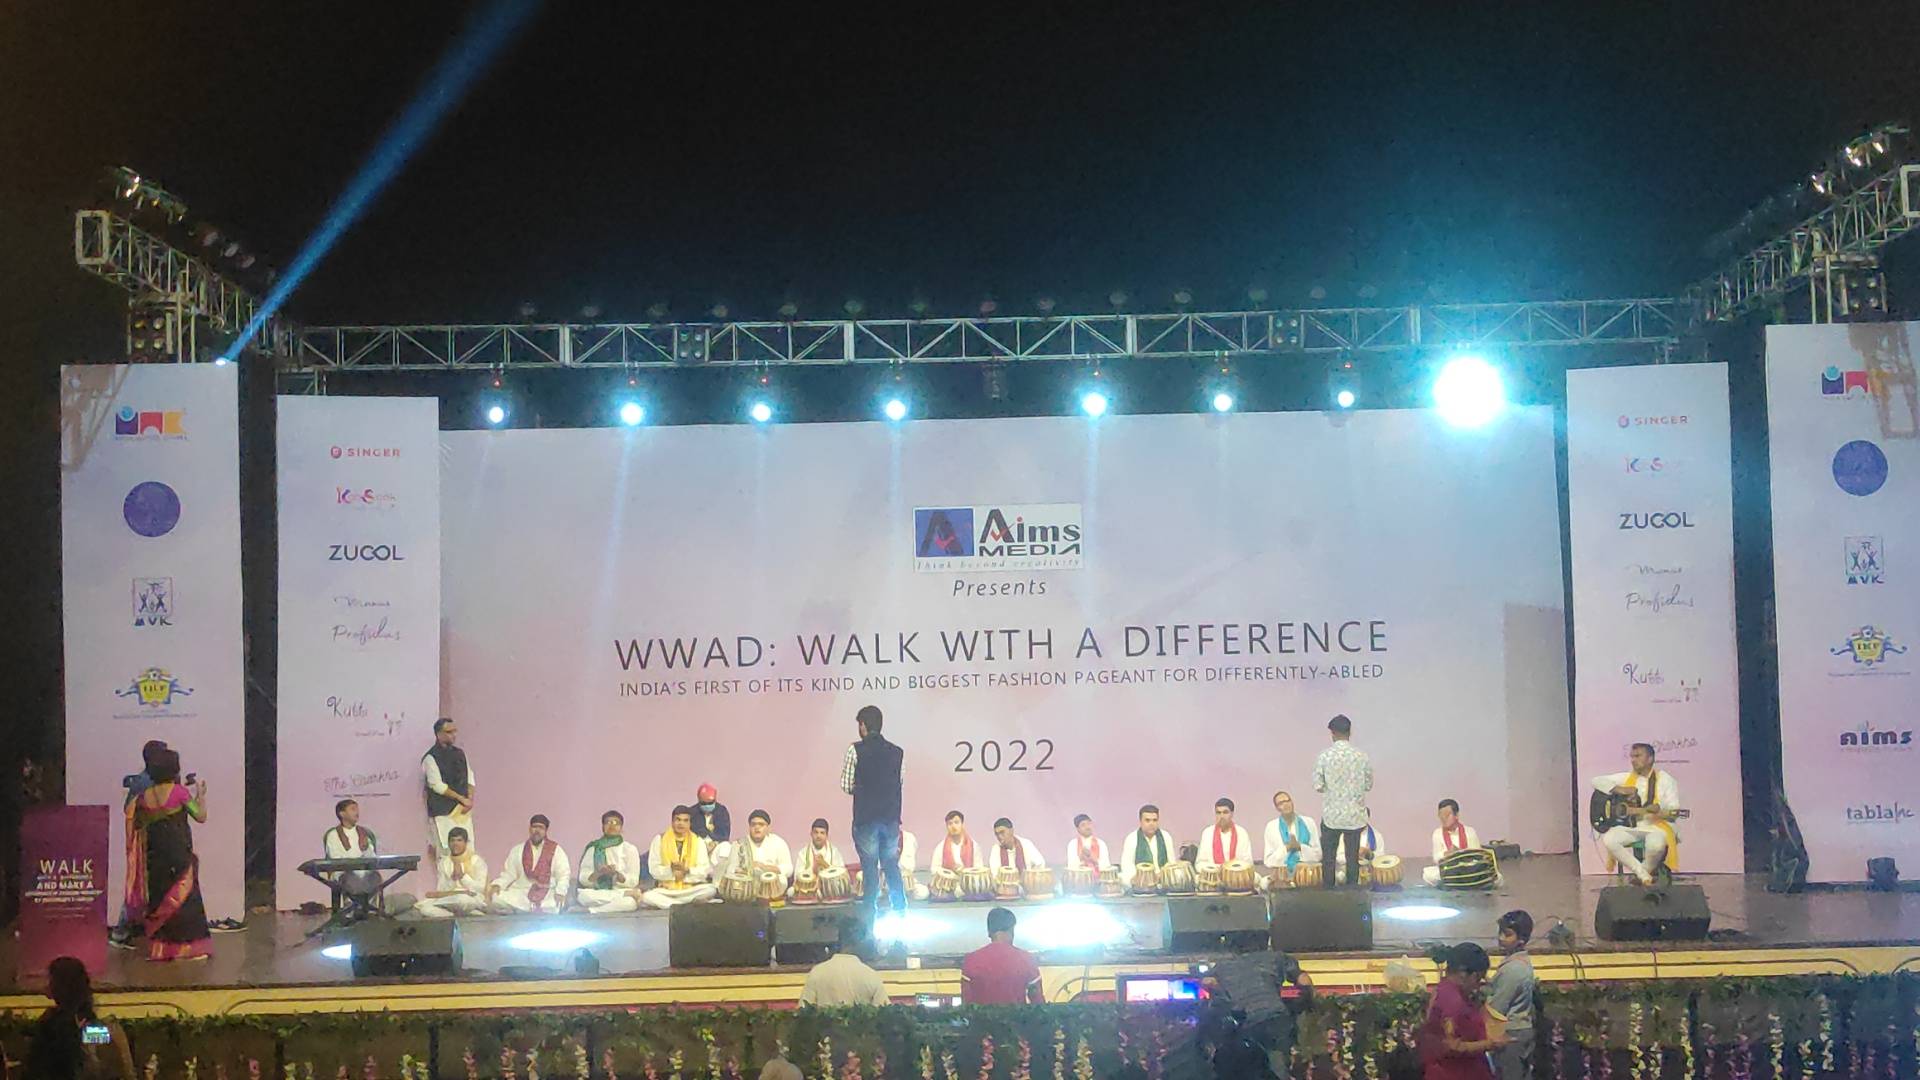 Chief Sponsors for Walk With A Difference – Fashion show organized by AIMS Media – 2022